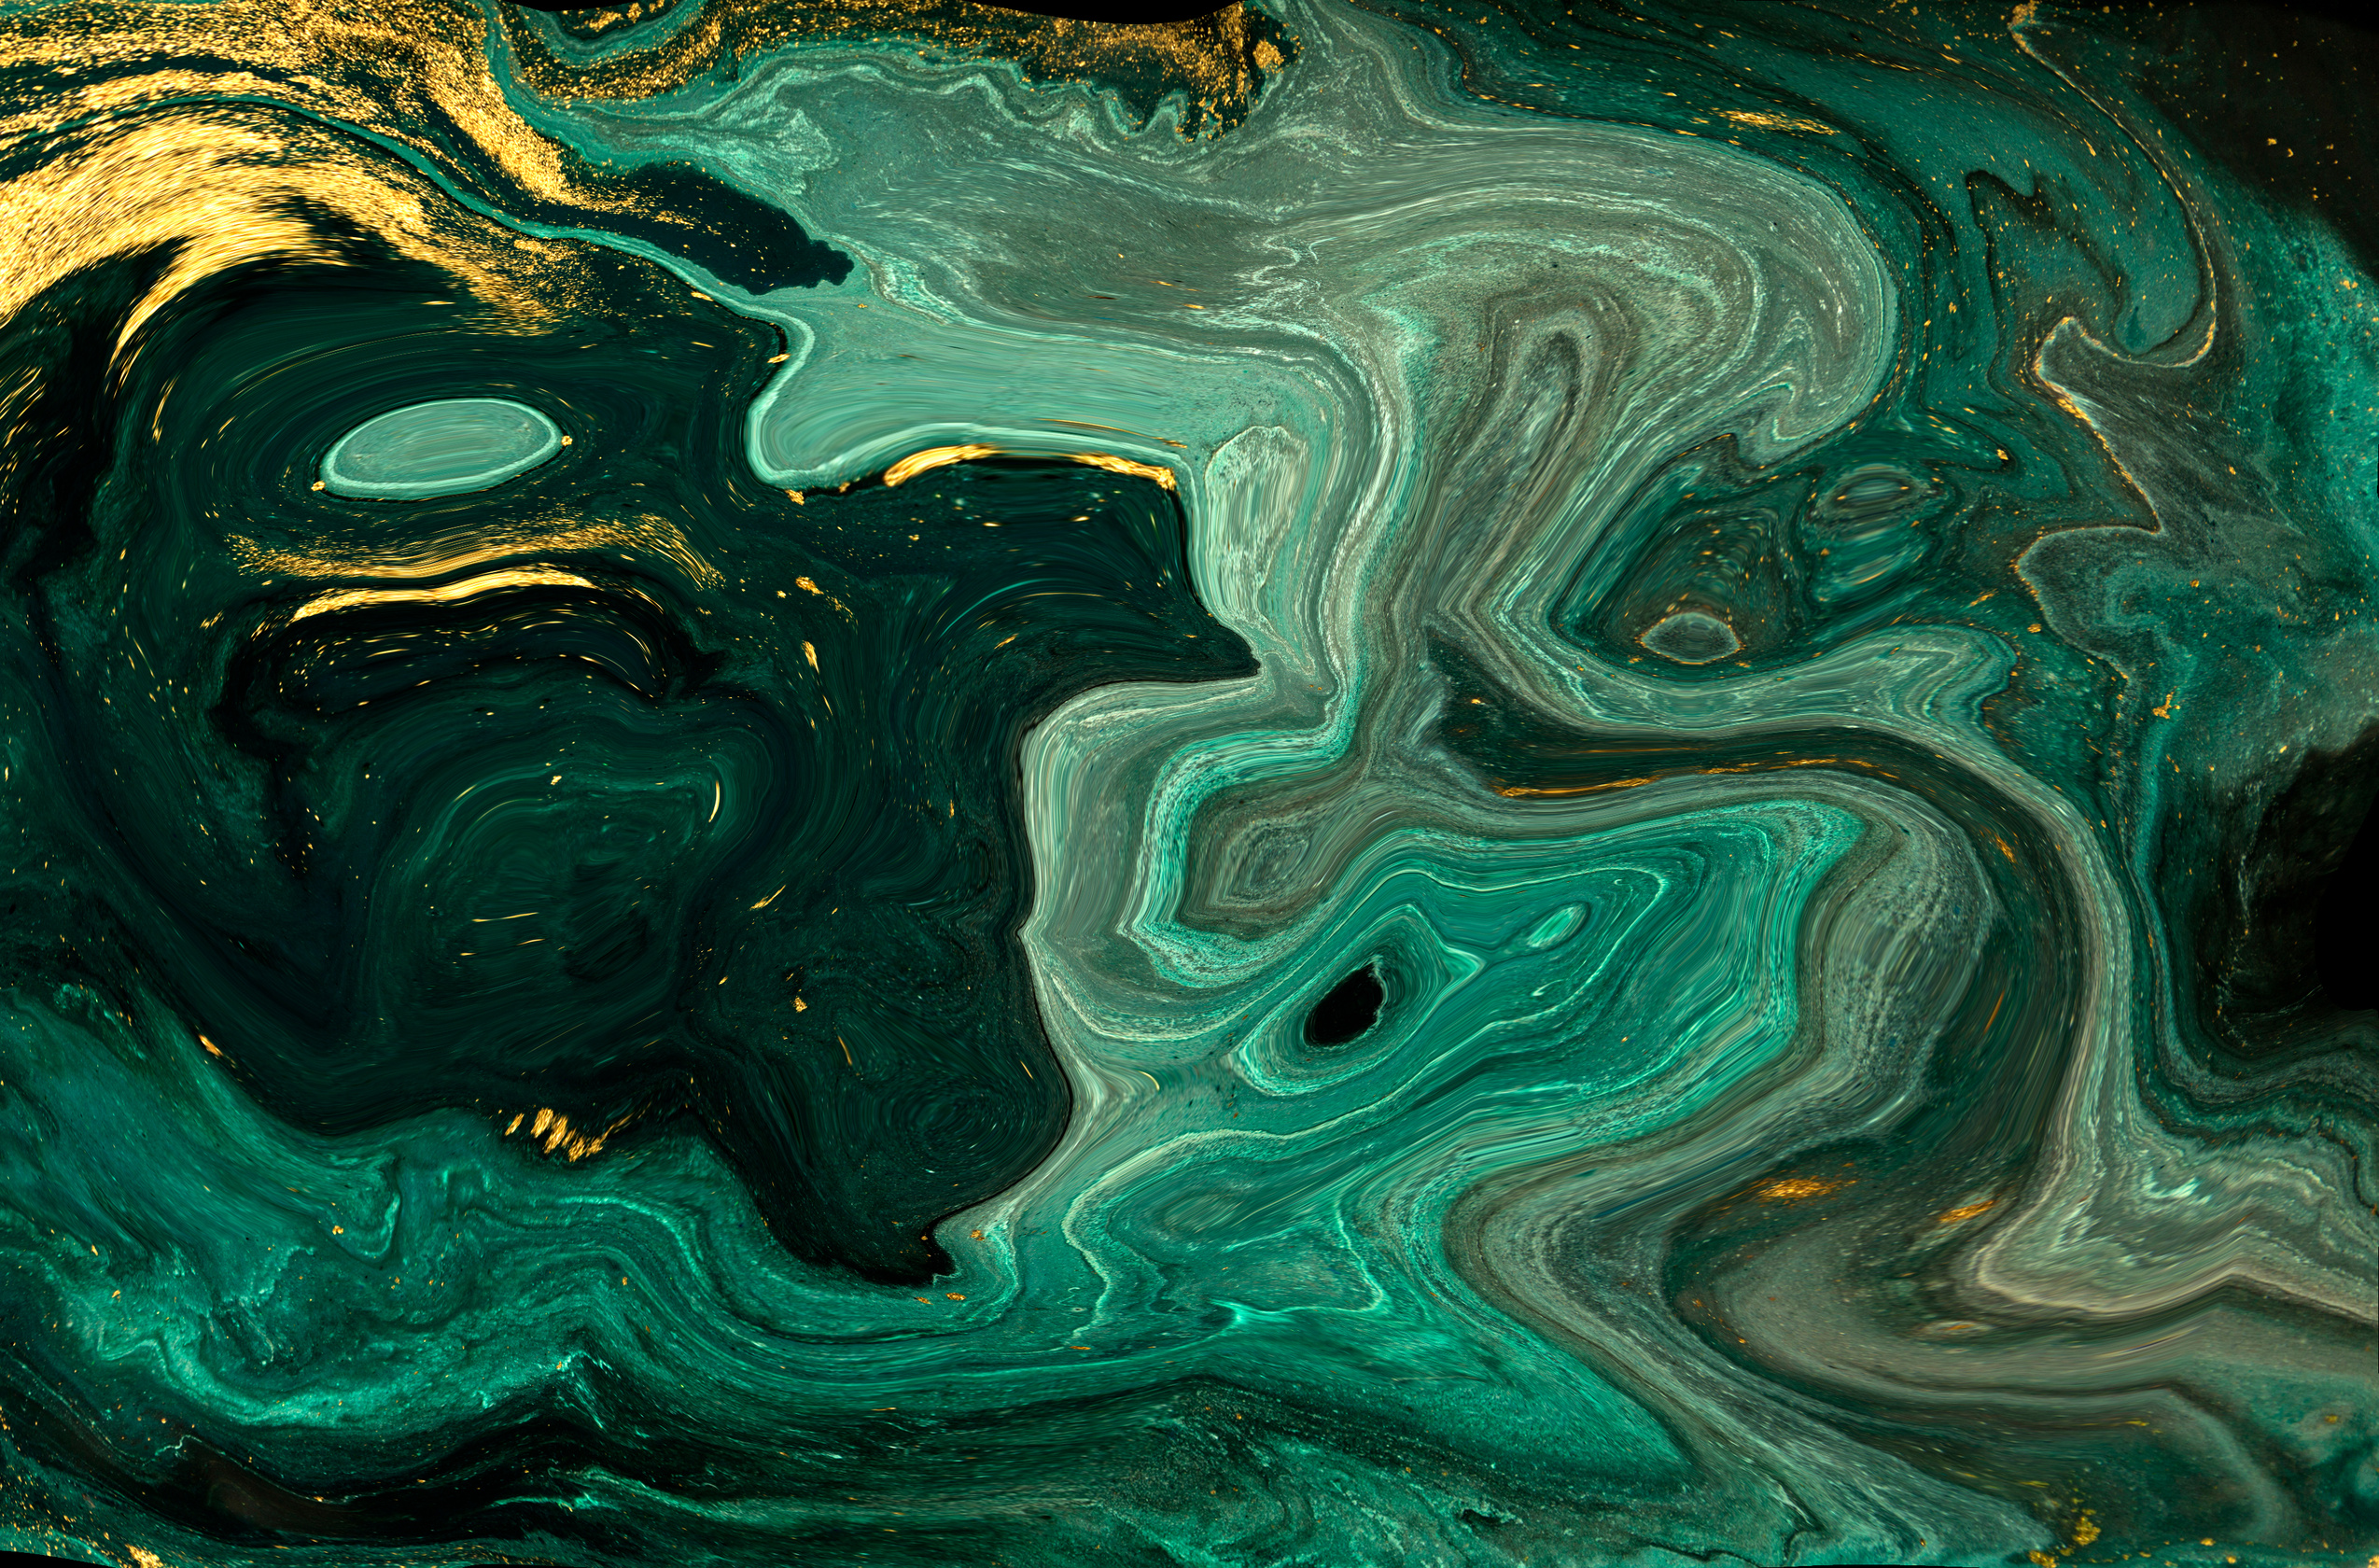 Green and Gold Marbling Texture Design. Marble Pattern. Fluid Art.